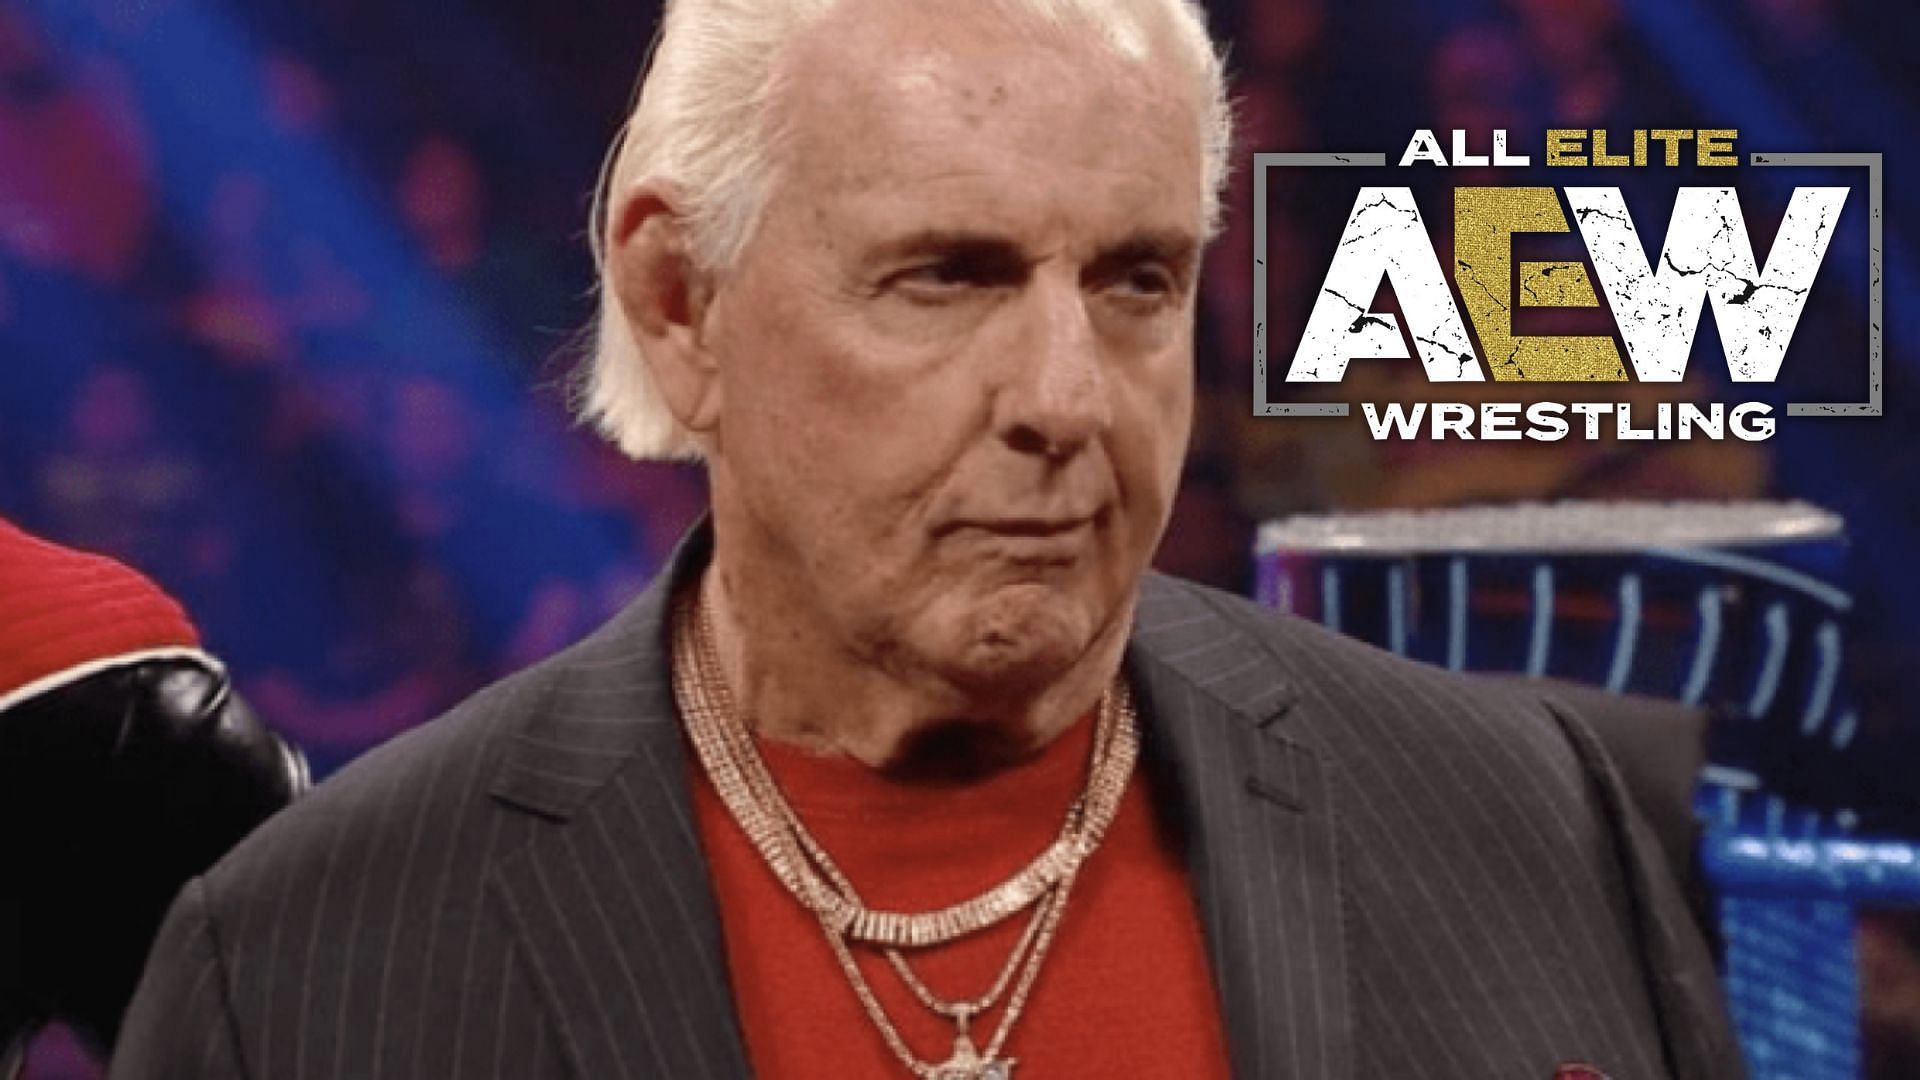 Ric Flair had some interesting comments this week.